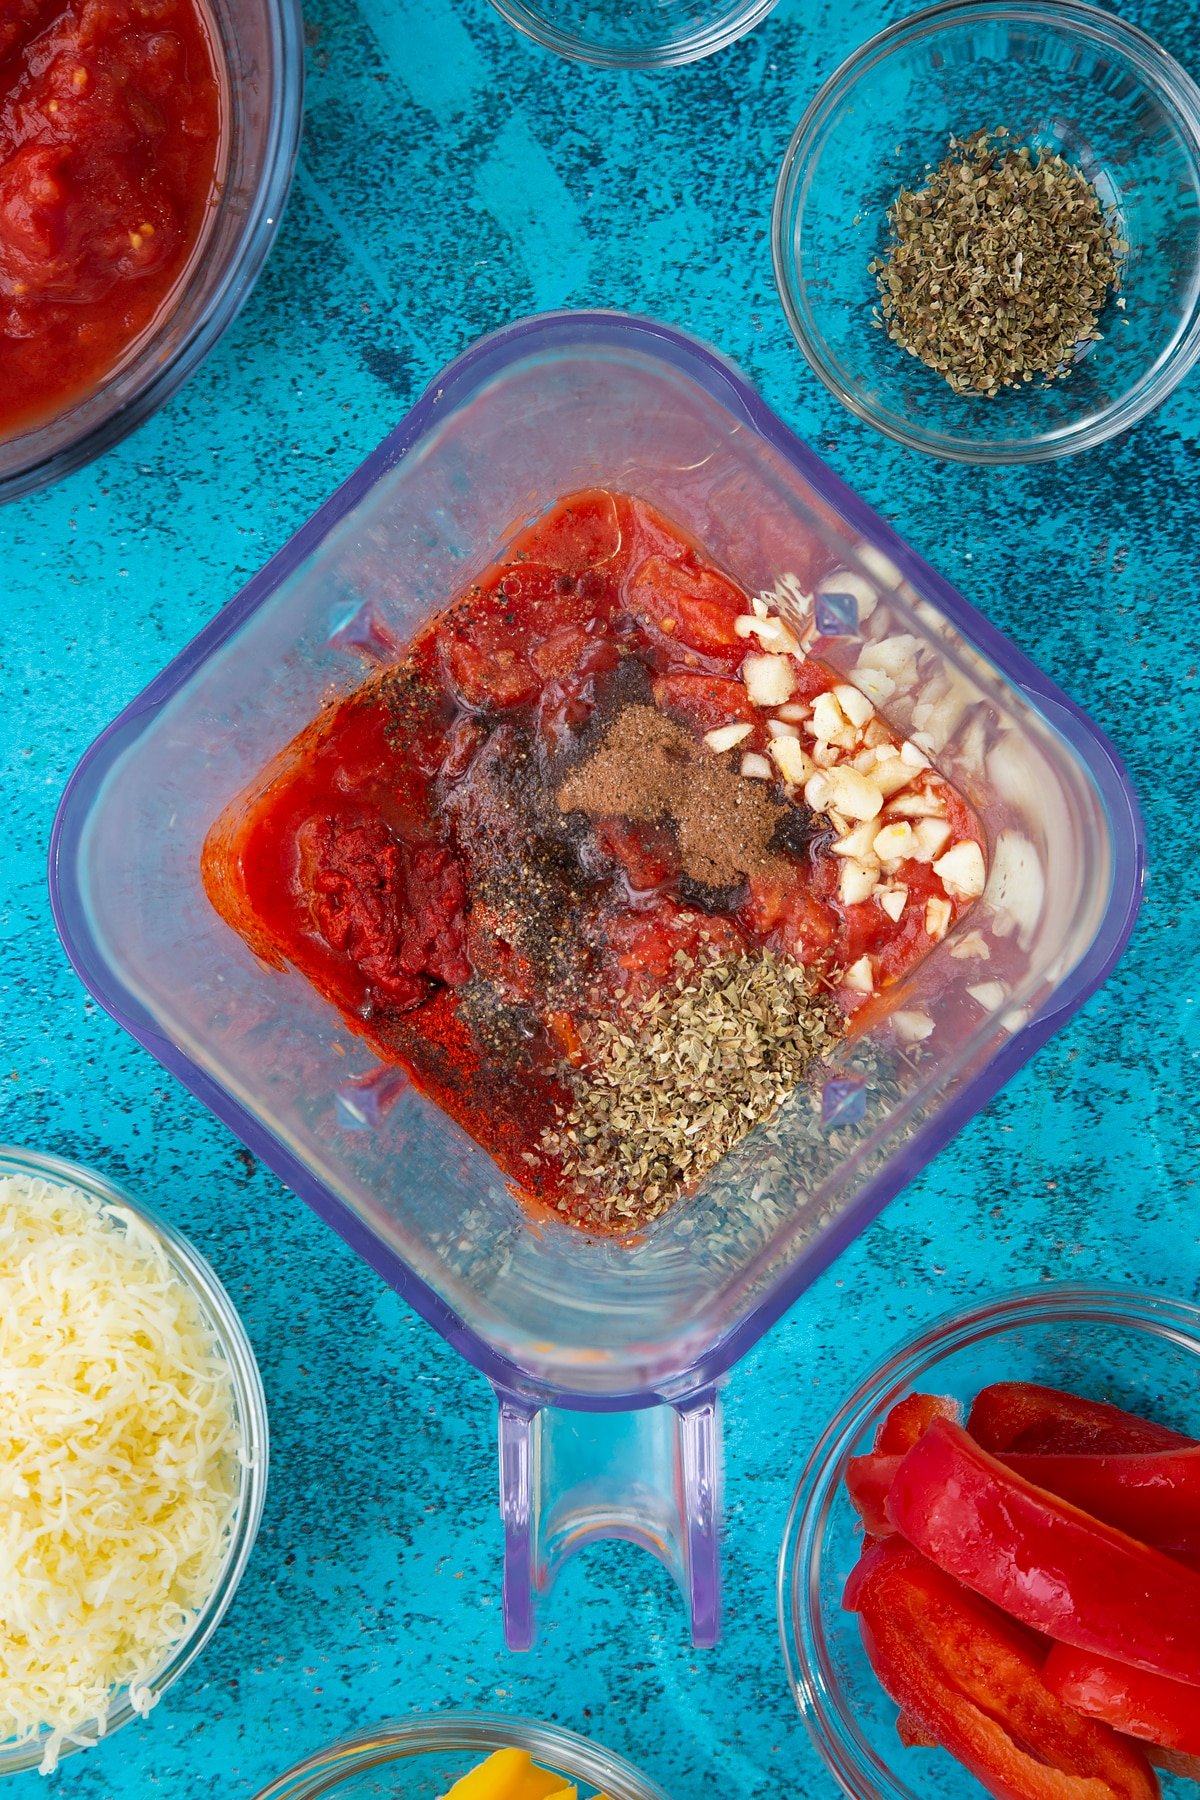 Tinned tomatoes, tomato puree, olive oil, vinegar and spices in a blender. Ingredients to make Quorn mince enchiladas surround the blender.